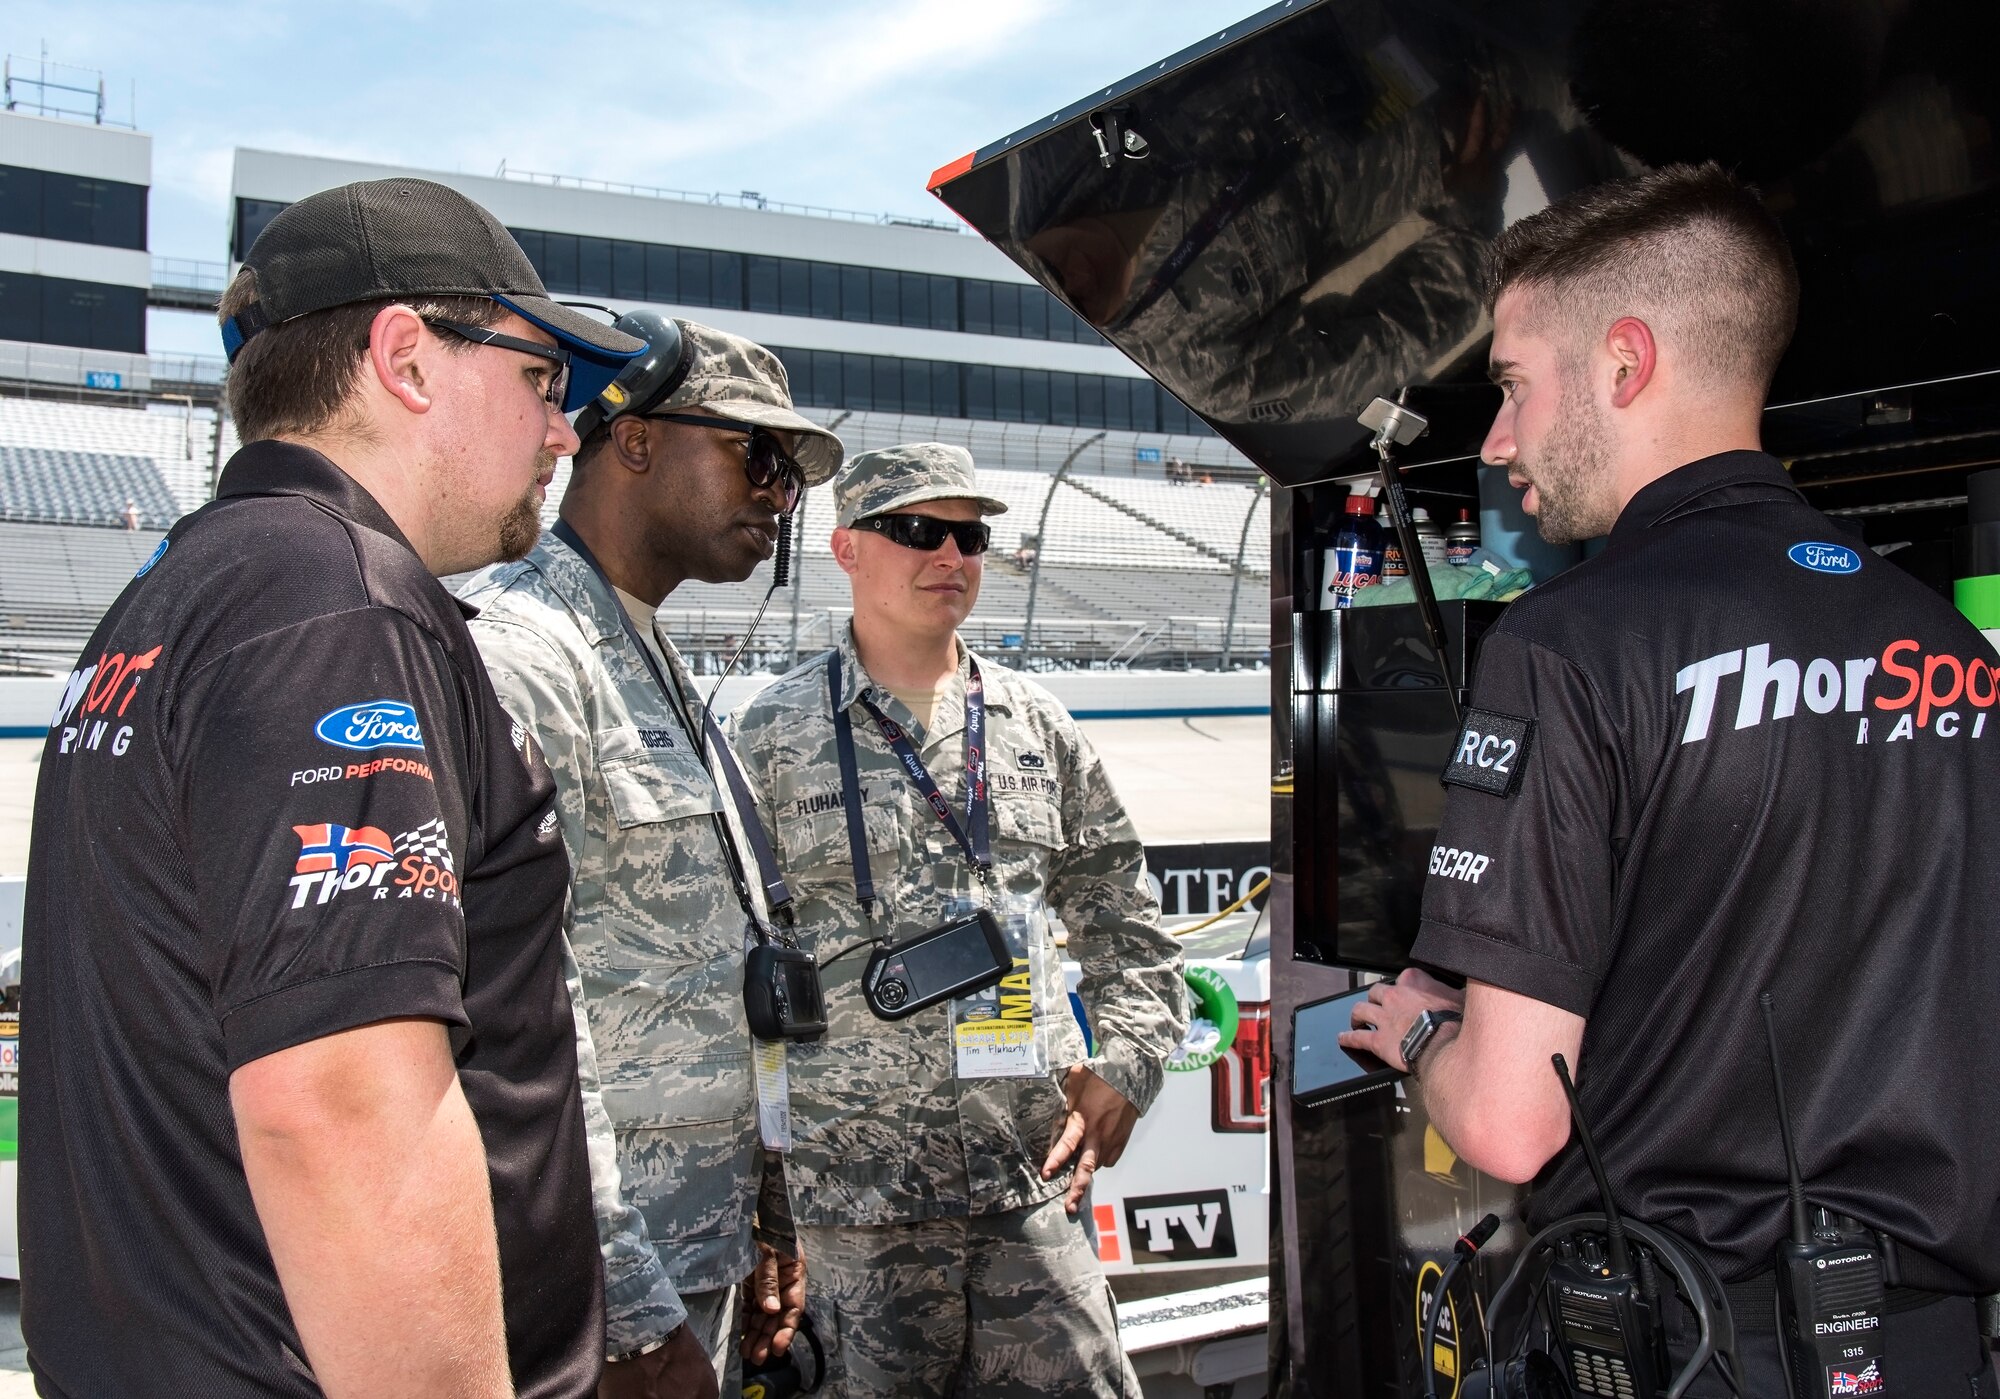 Tech. Sgt. Mikel Rogers, center left, 436th Civil Engineer Squadron emergency management operations NCO in charge, and Tech. Sgt. Timothy Fluharty, center right, 373rd Training Squadron, Detachment 3, C-5M hydraulics instructor, speak with ThorSport Racing team members Nick Gardiner and Brian Ross, mechanic and race engineer, respectively, May 4, 2018, at Dover International Speedway, Dover, Del. Honorary pit crew members spoke with team members on pit road prior to qualifying for the 19th Annual “JEGS 200” race later that afternoon. (U.S. Air Force photo by Roland Balik)